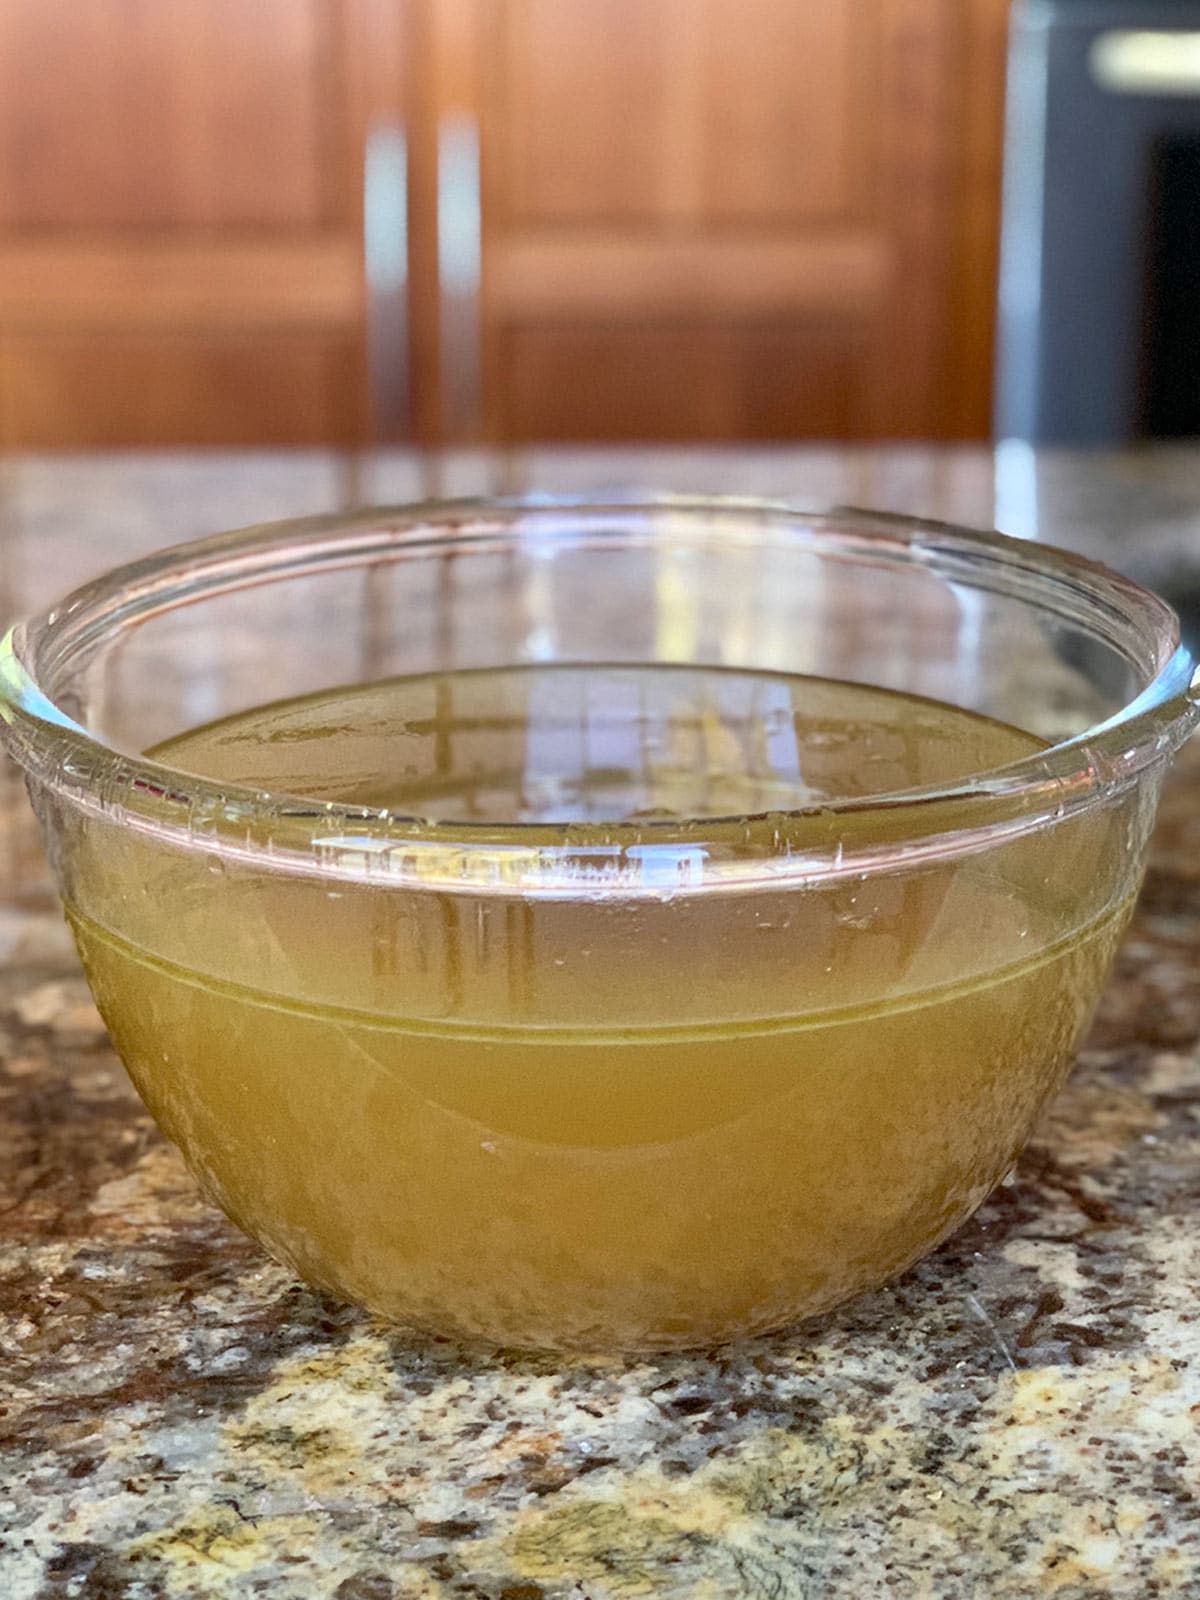 Roasted turkey stock in a glass bowl on a kitchen counter after being well strained.